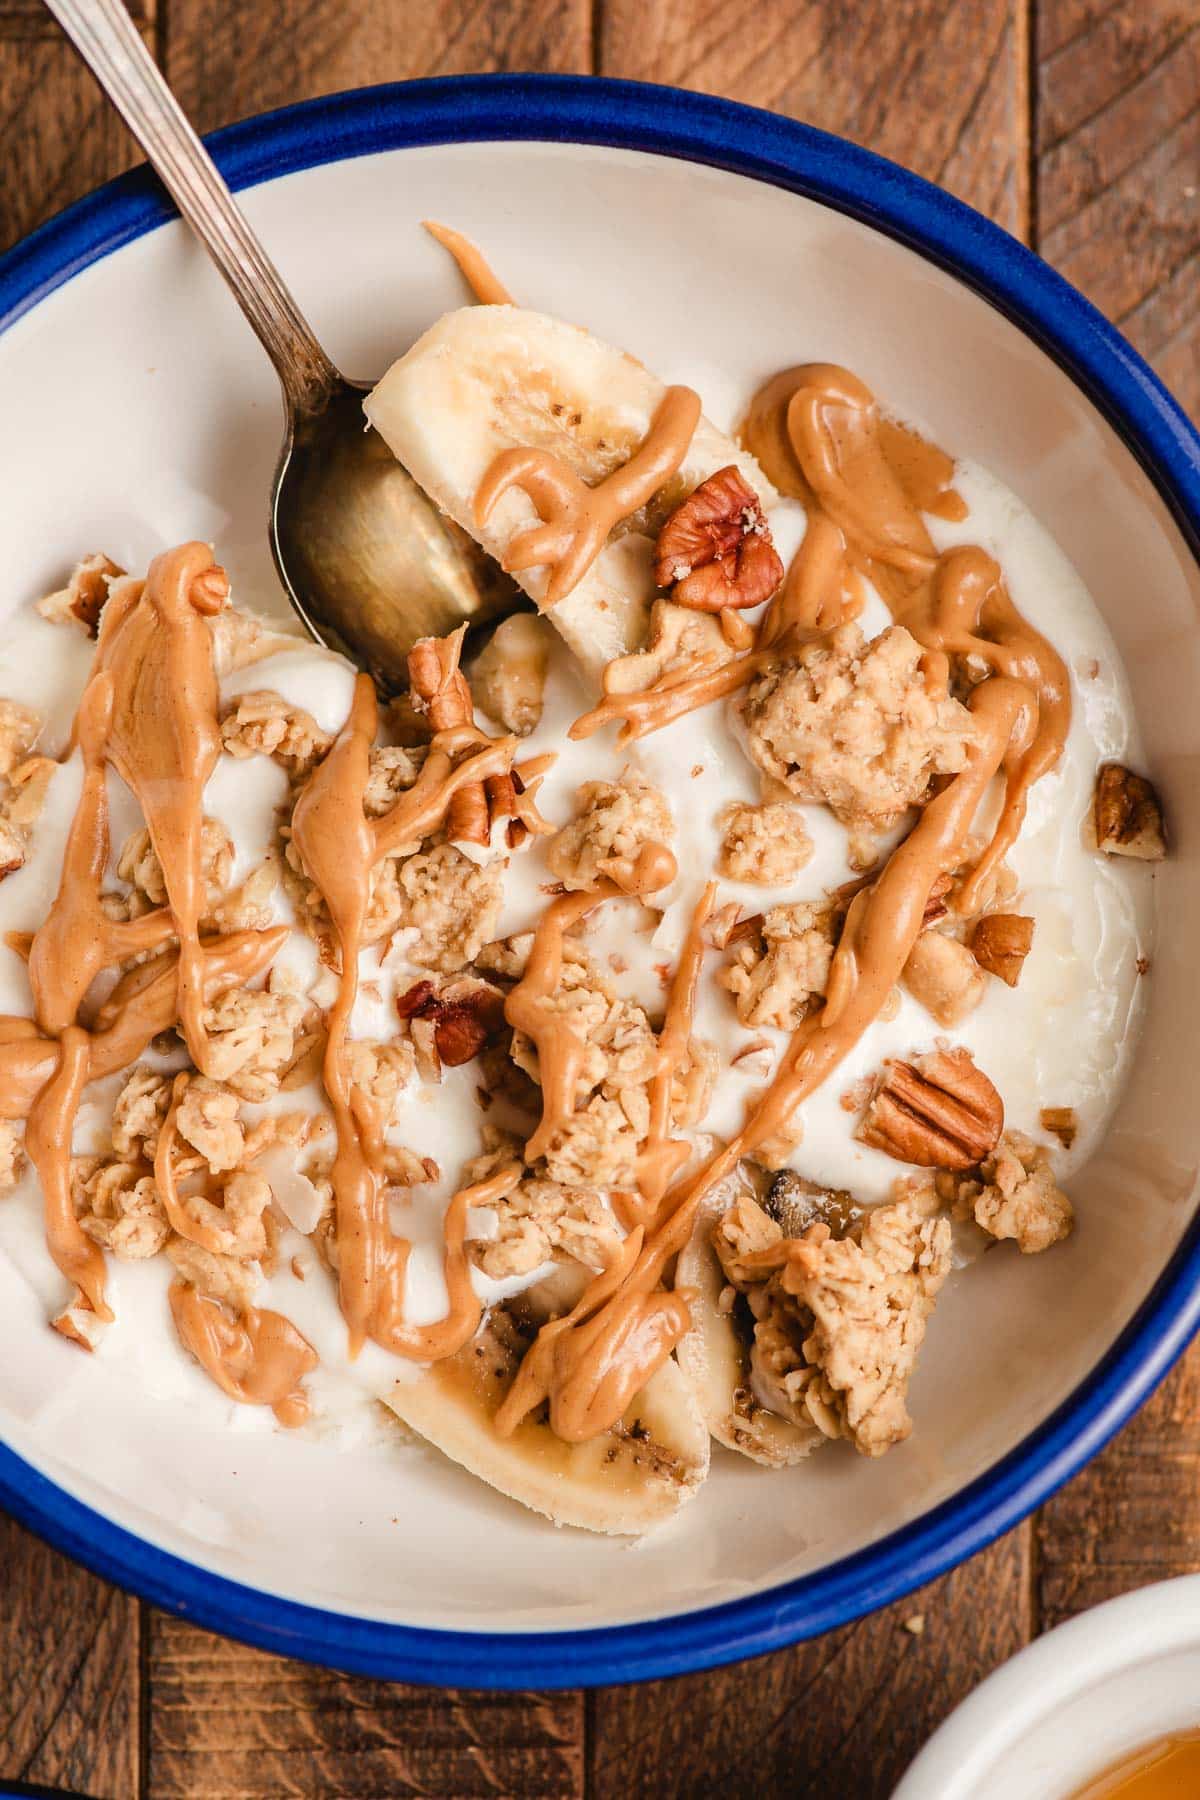 Breakfast Banana Split topped with peanut butter, pecans, and granola.